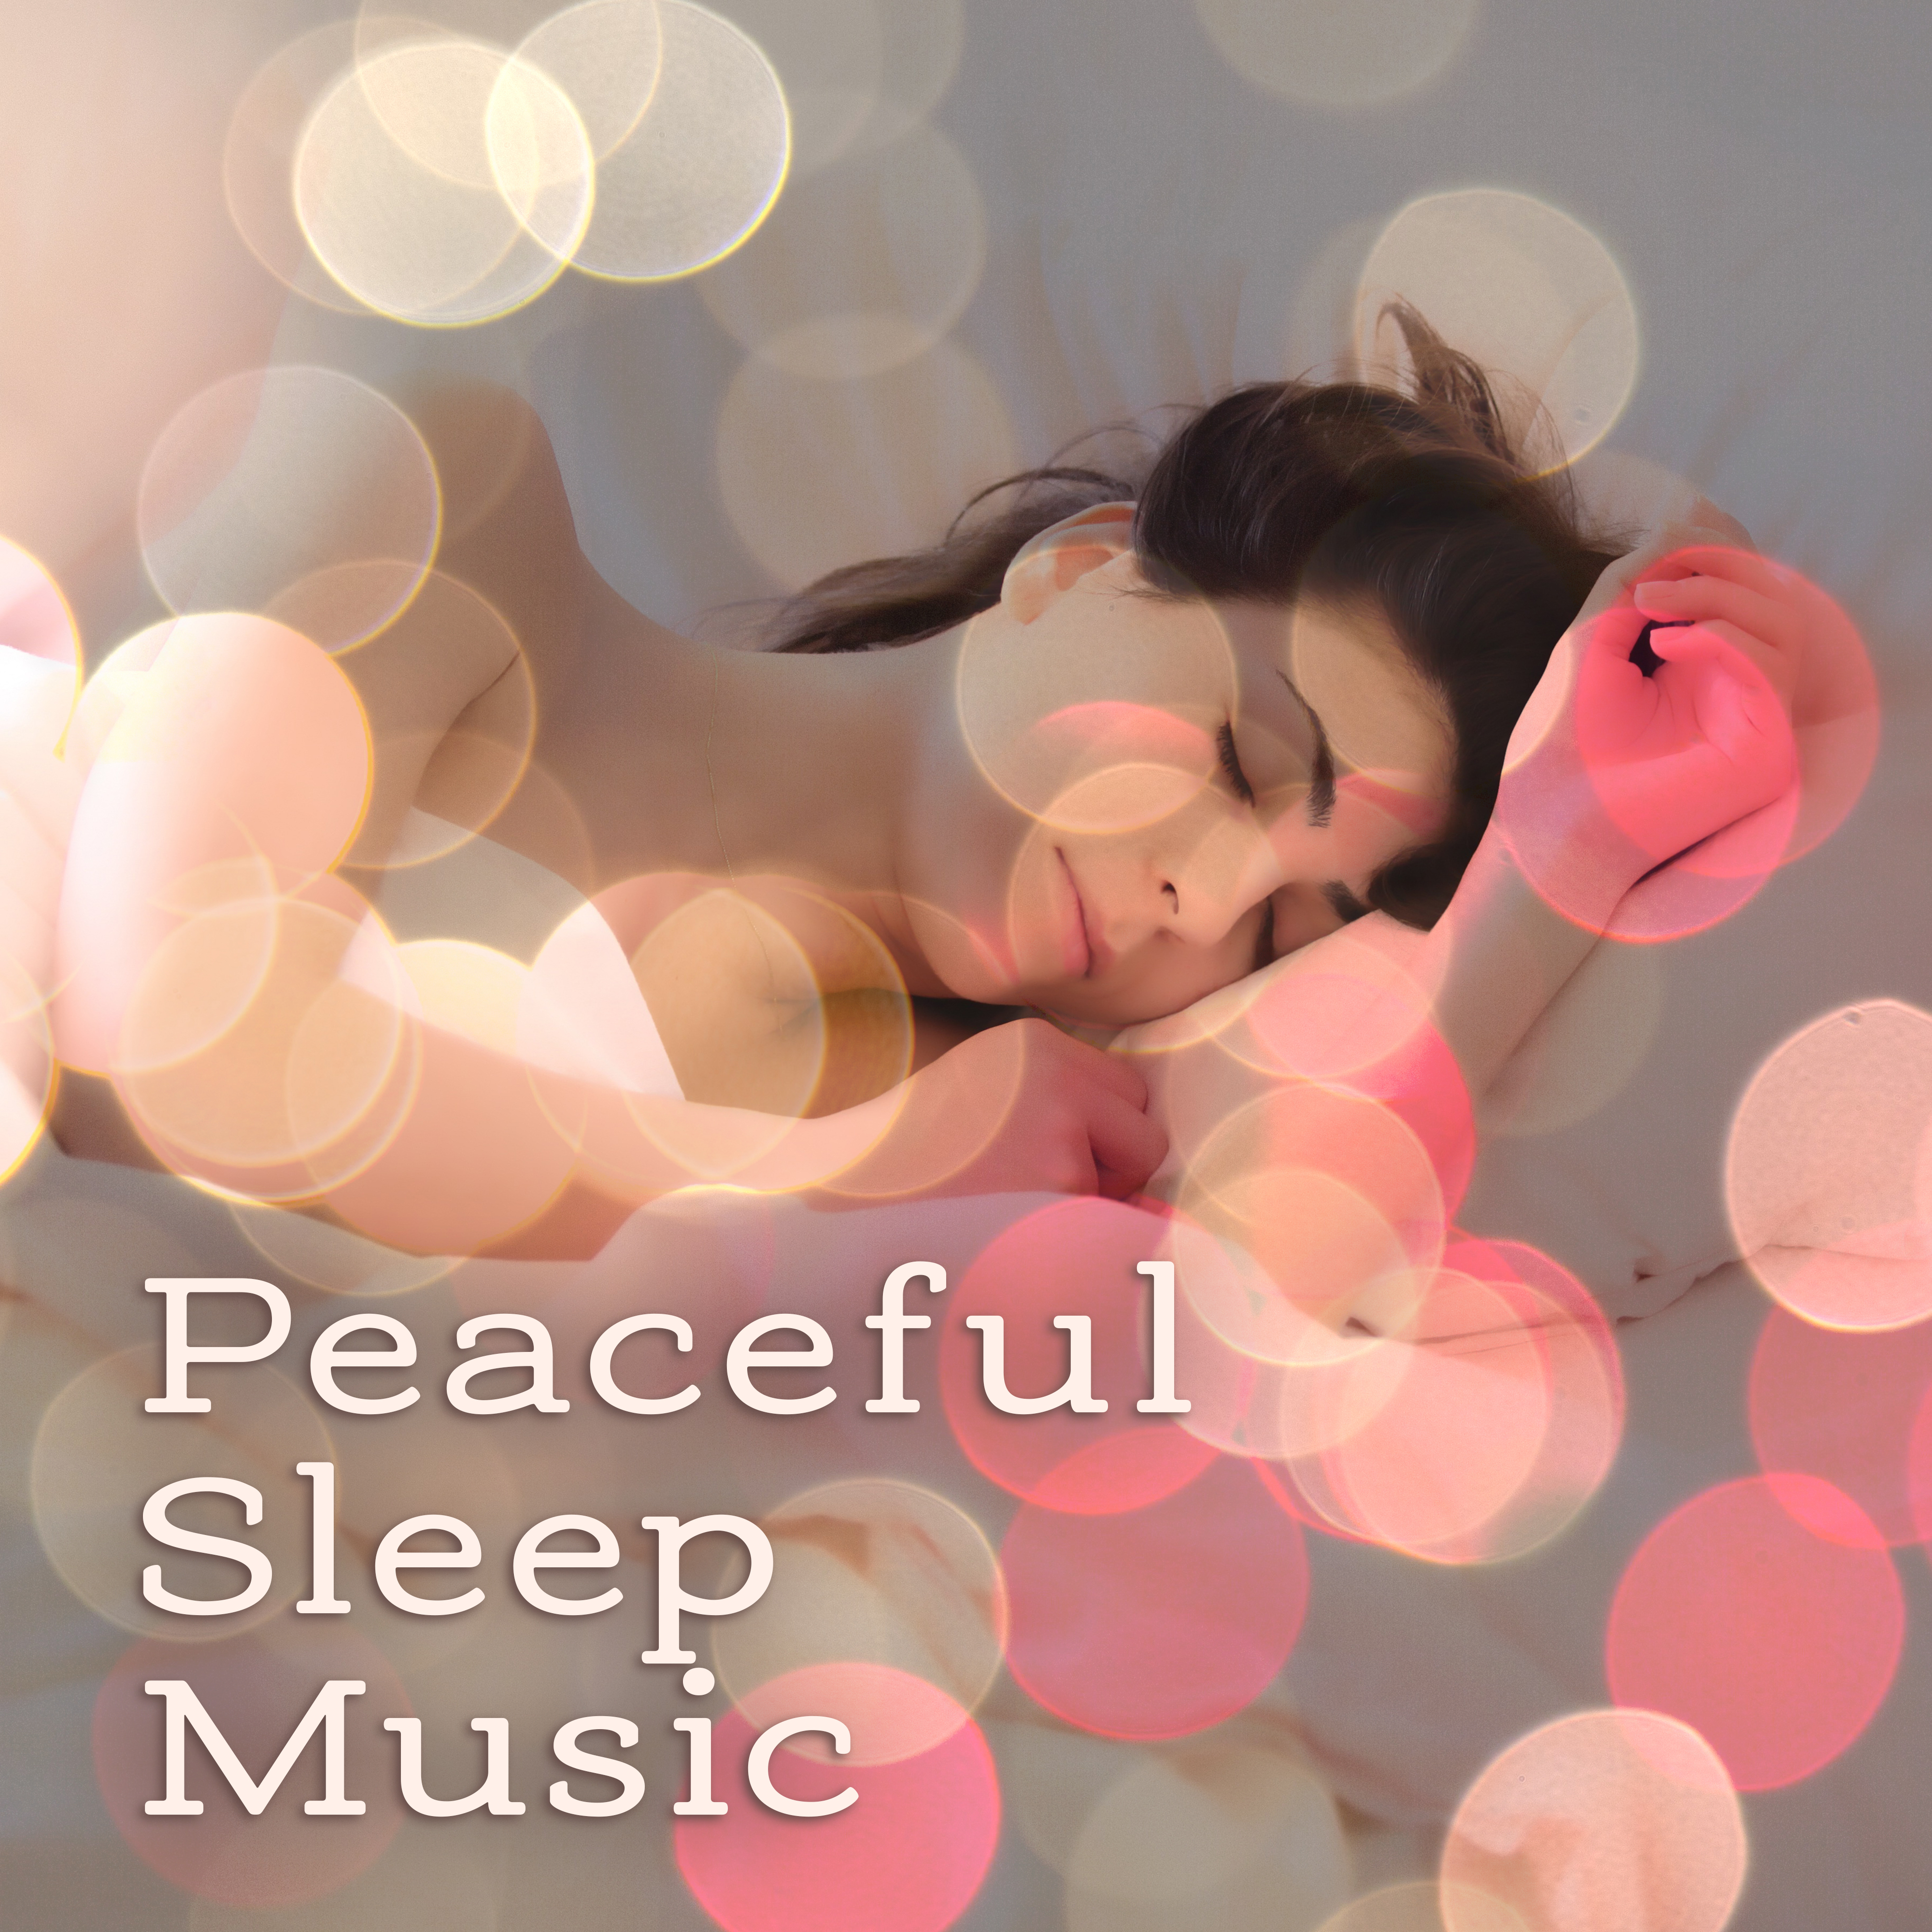 Peaceful Sleep Music – Pure Relaxation, Stress Free, New Age Music to Bed, Restful Sleep, Healing Lullabies at Night, Calm Down, Deep Dreams